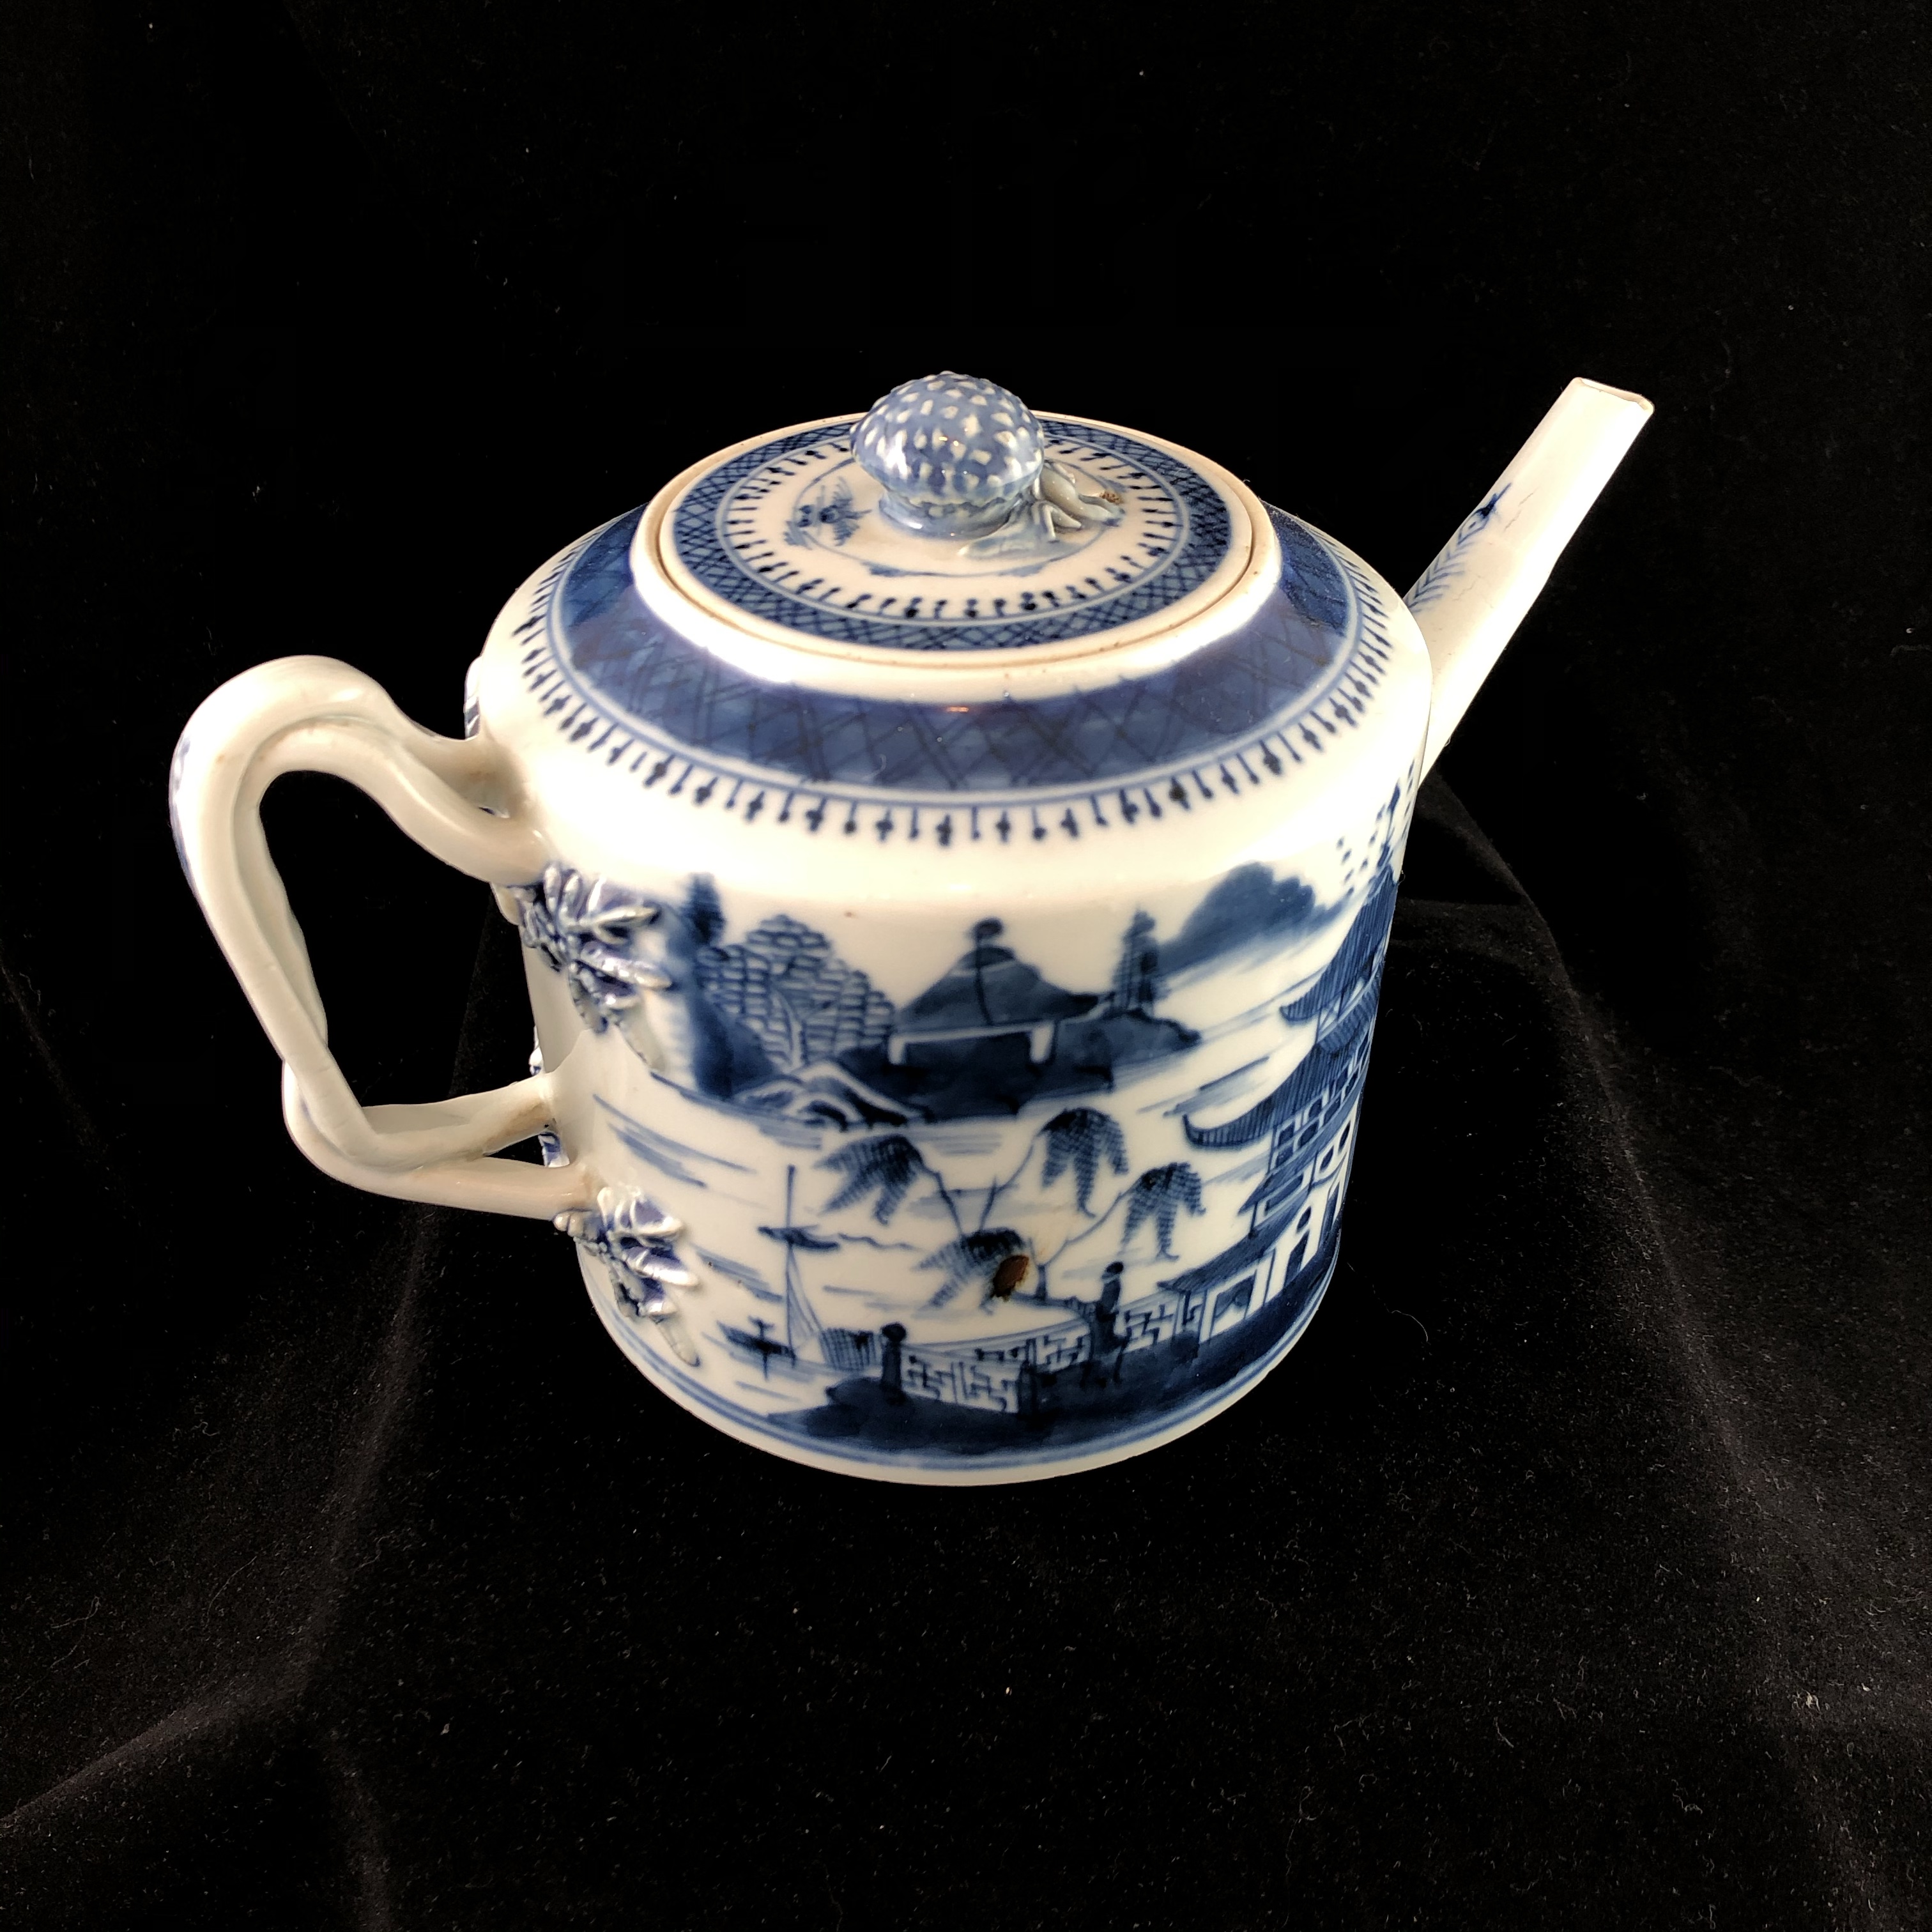 Blue and white Qing Dynasty 18th century teapot